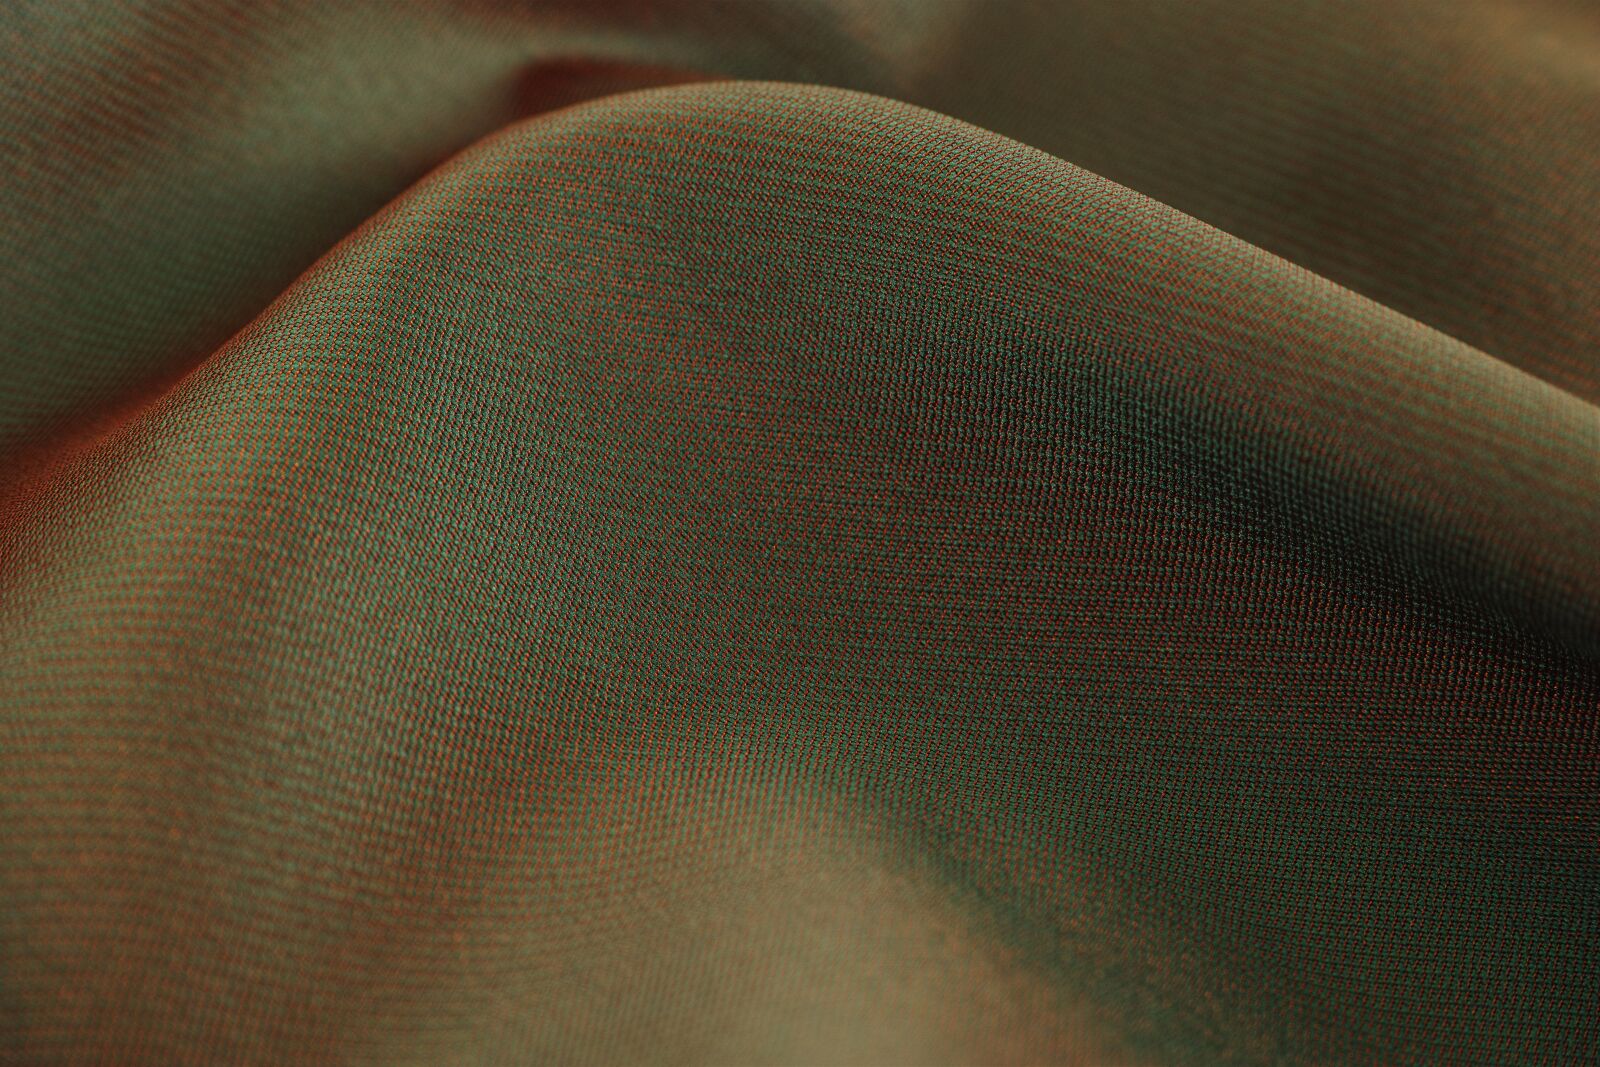 Sigma dp3 Quattro sample photo. Green, red, fabric photography